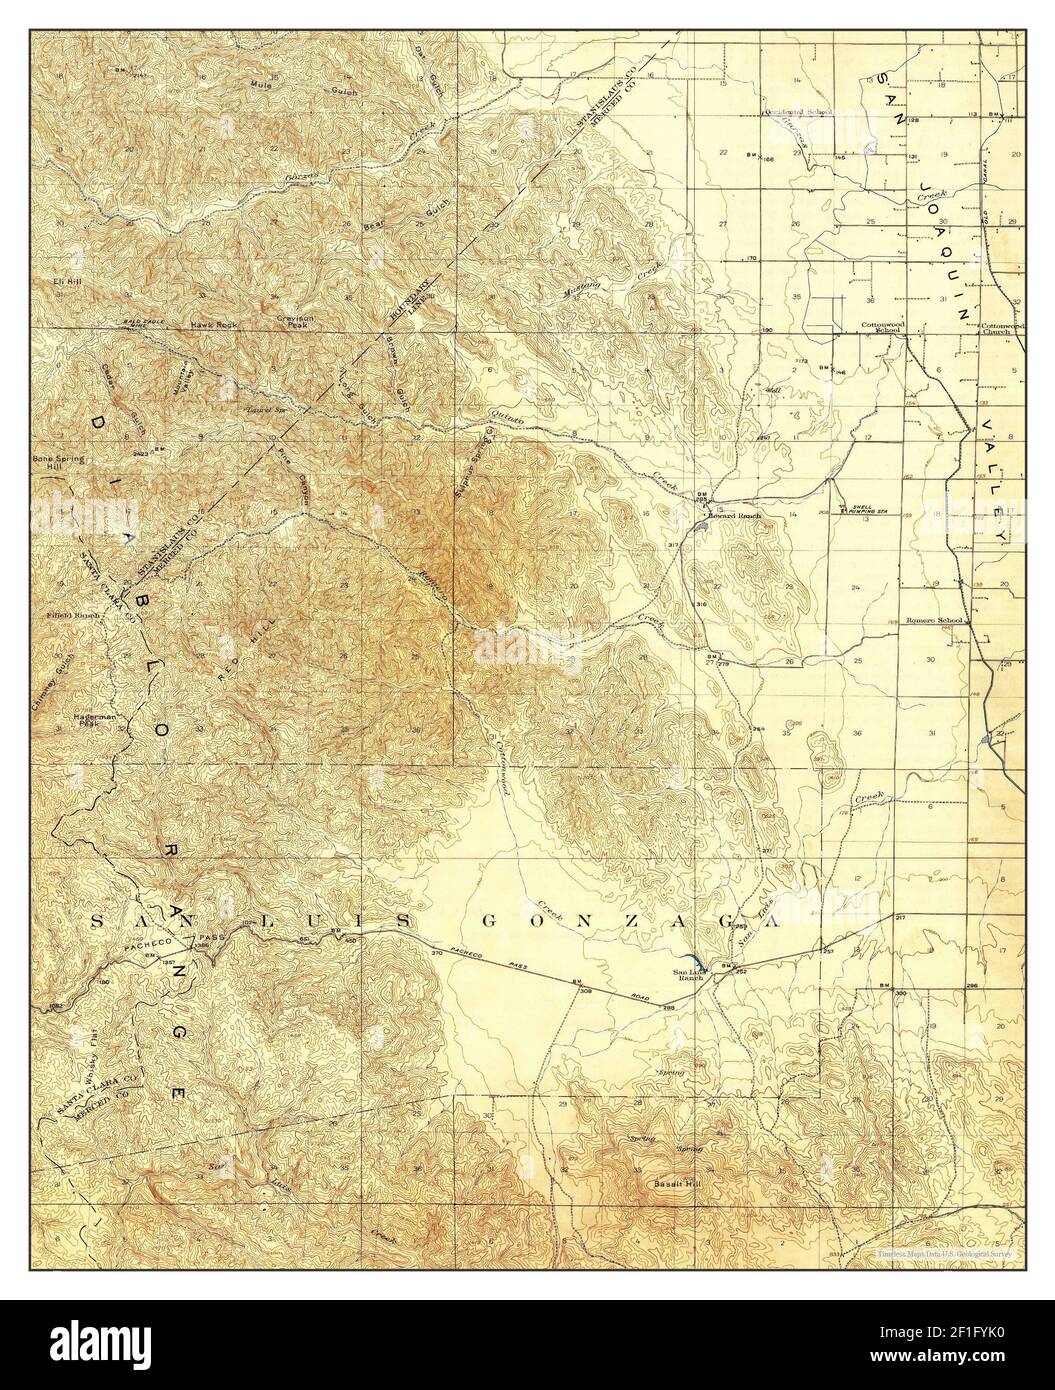 Pacheco Pass, California, map 1920, 1:62500, United States of America by Timeless Maps, data U.S. Geological Survey Stock Photo